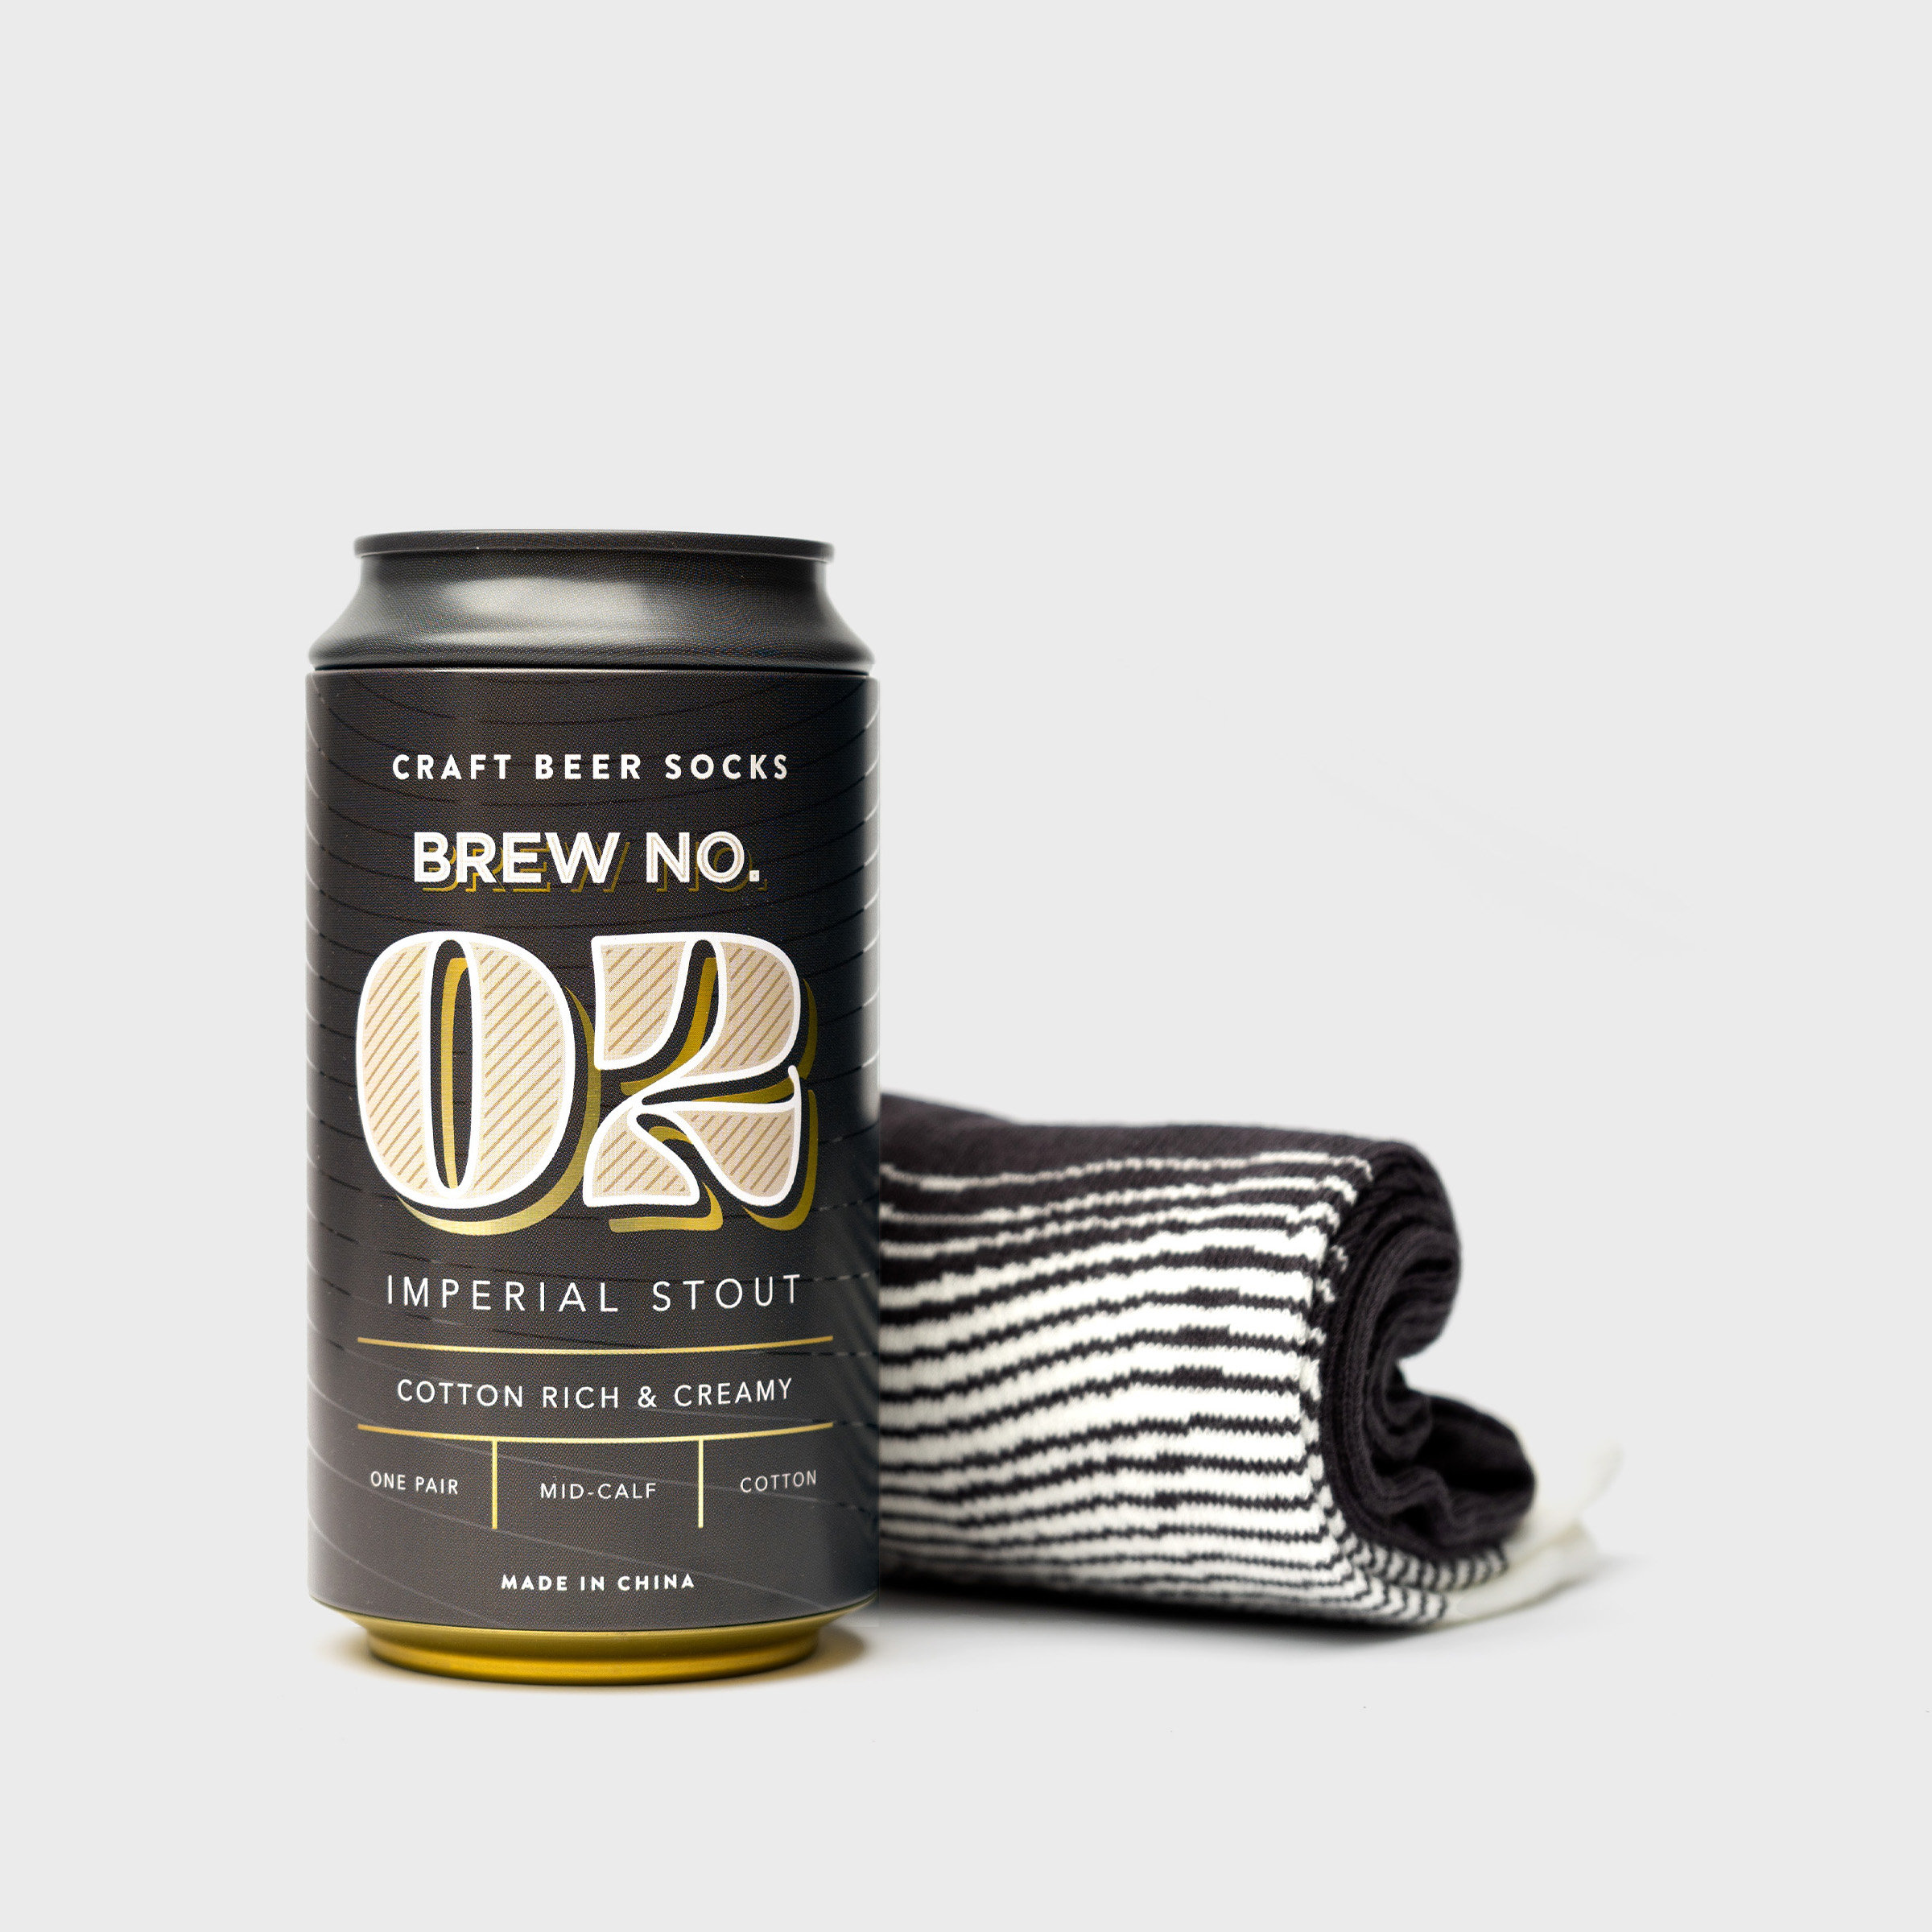 Craft Beer Socks Stout in a can